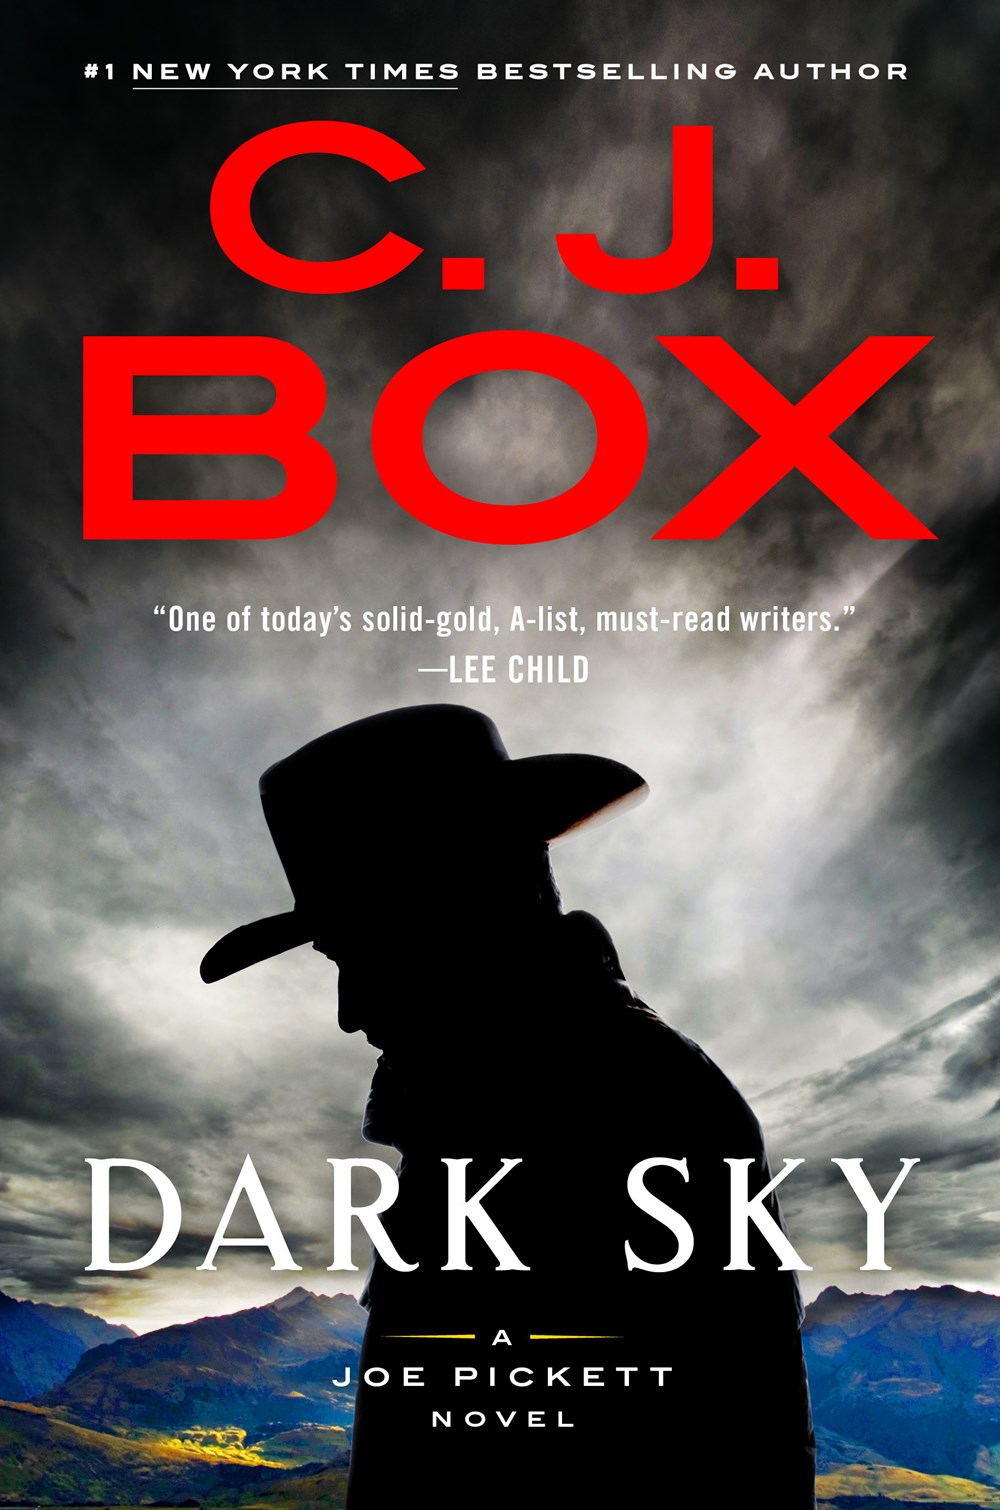 Read-Alikes for “Dark Sky” by C. J. Box | LibraryReads